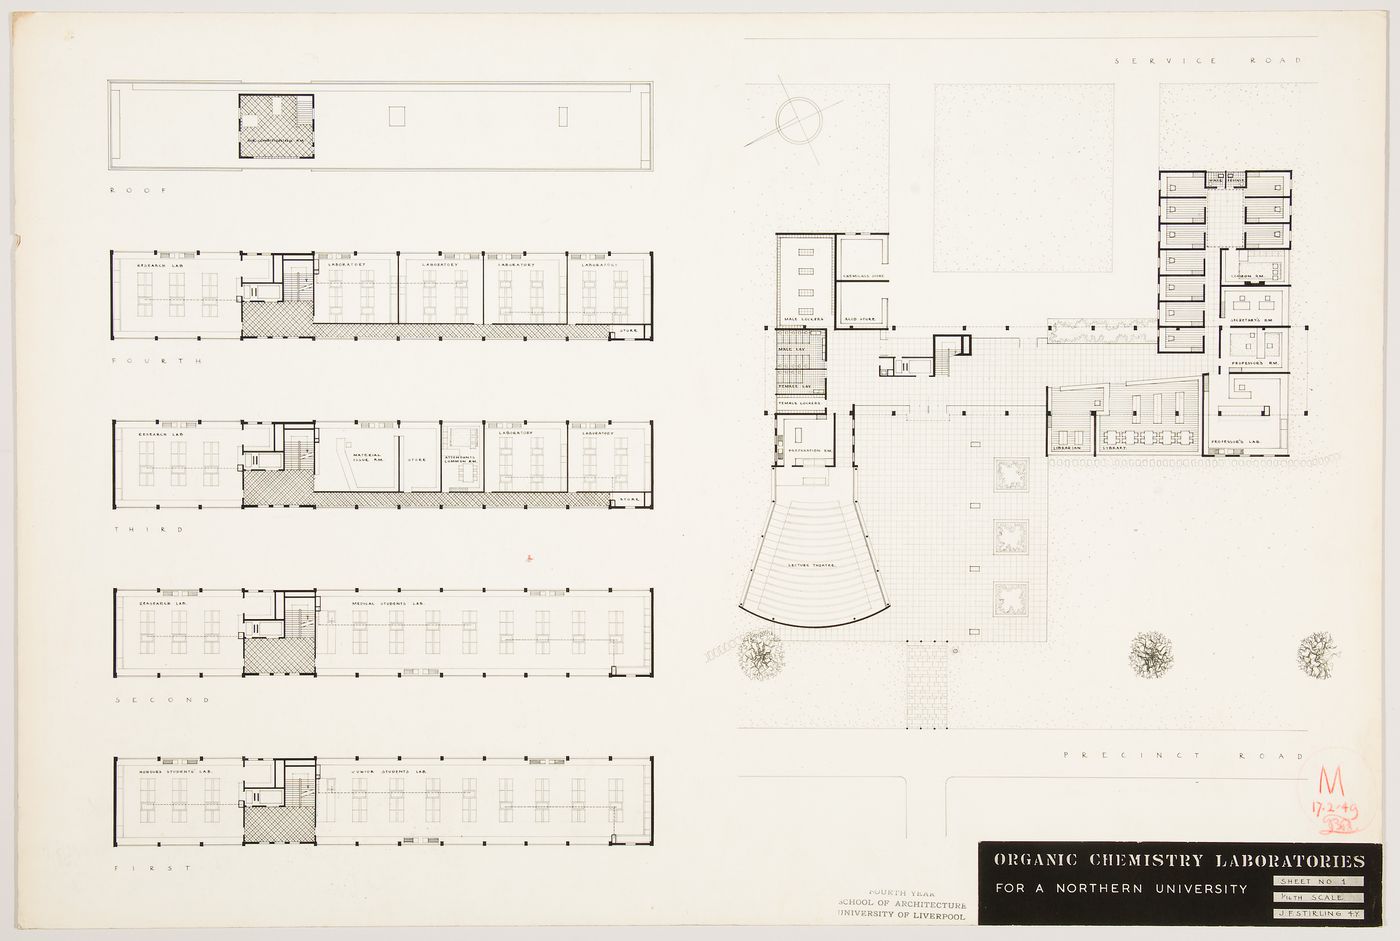 Organic Chemistry Laboratories for a Northern University, England: floor plans